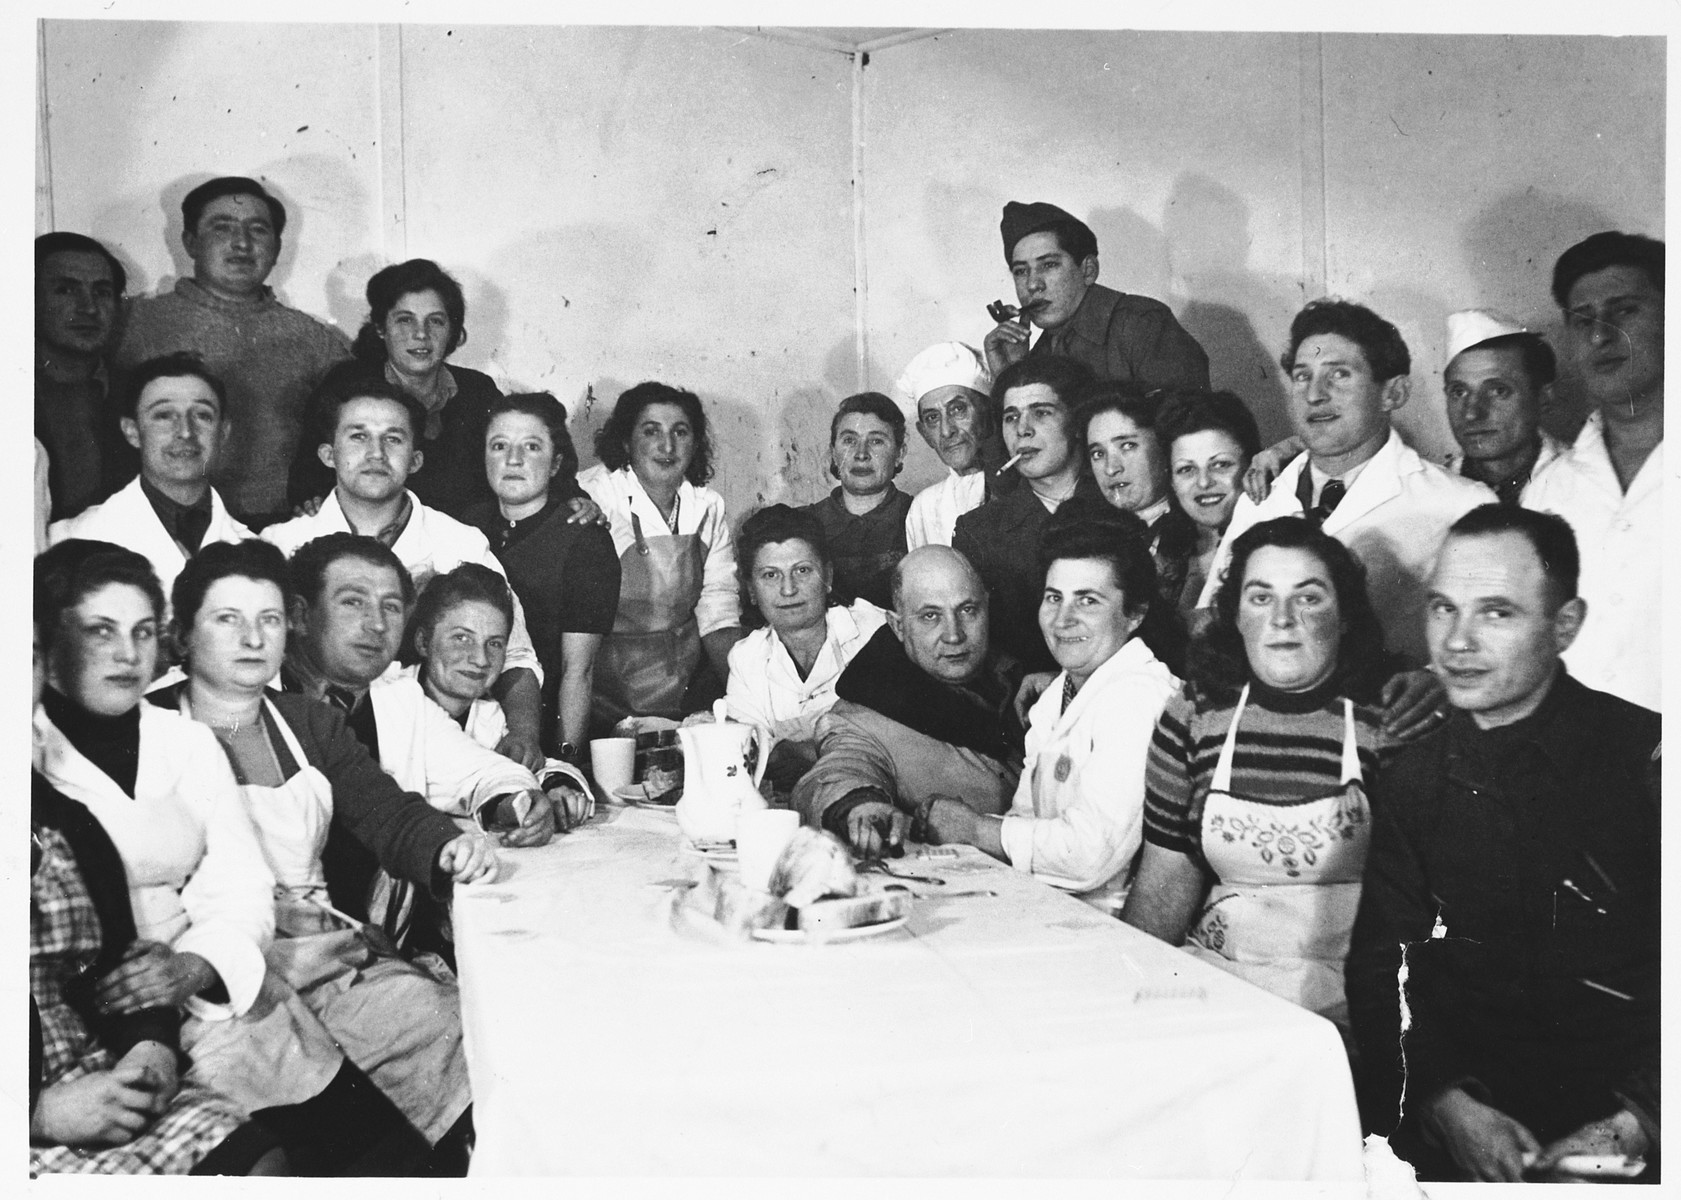 Group portrait of Jewish DPs gathered around a table in the Schlachtensee displaced persons camp.